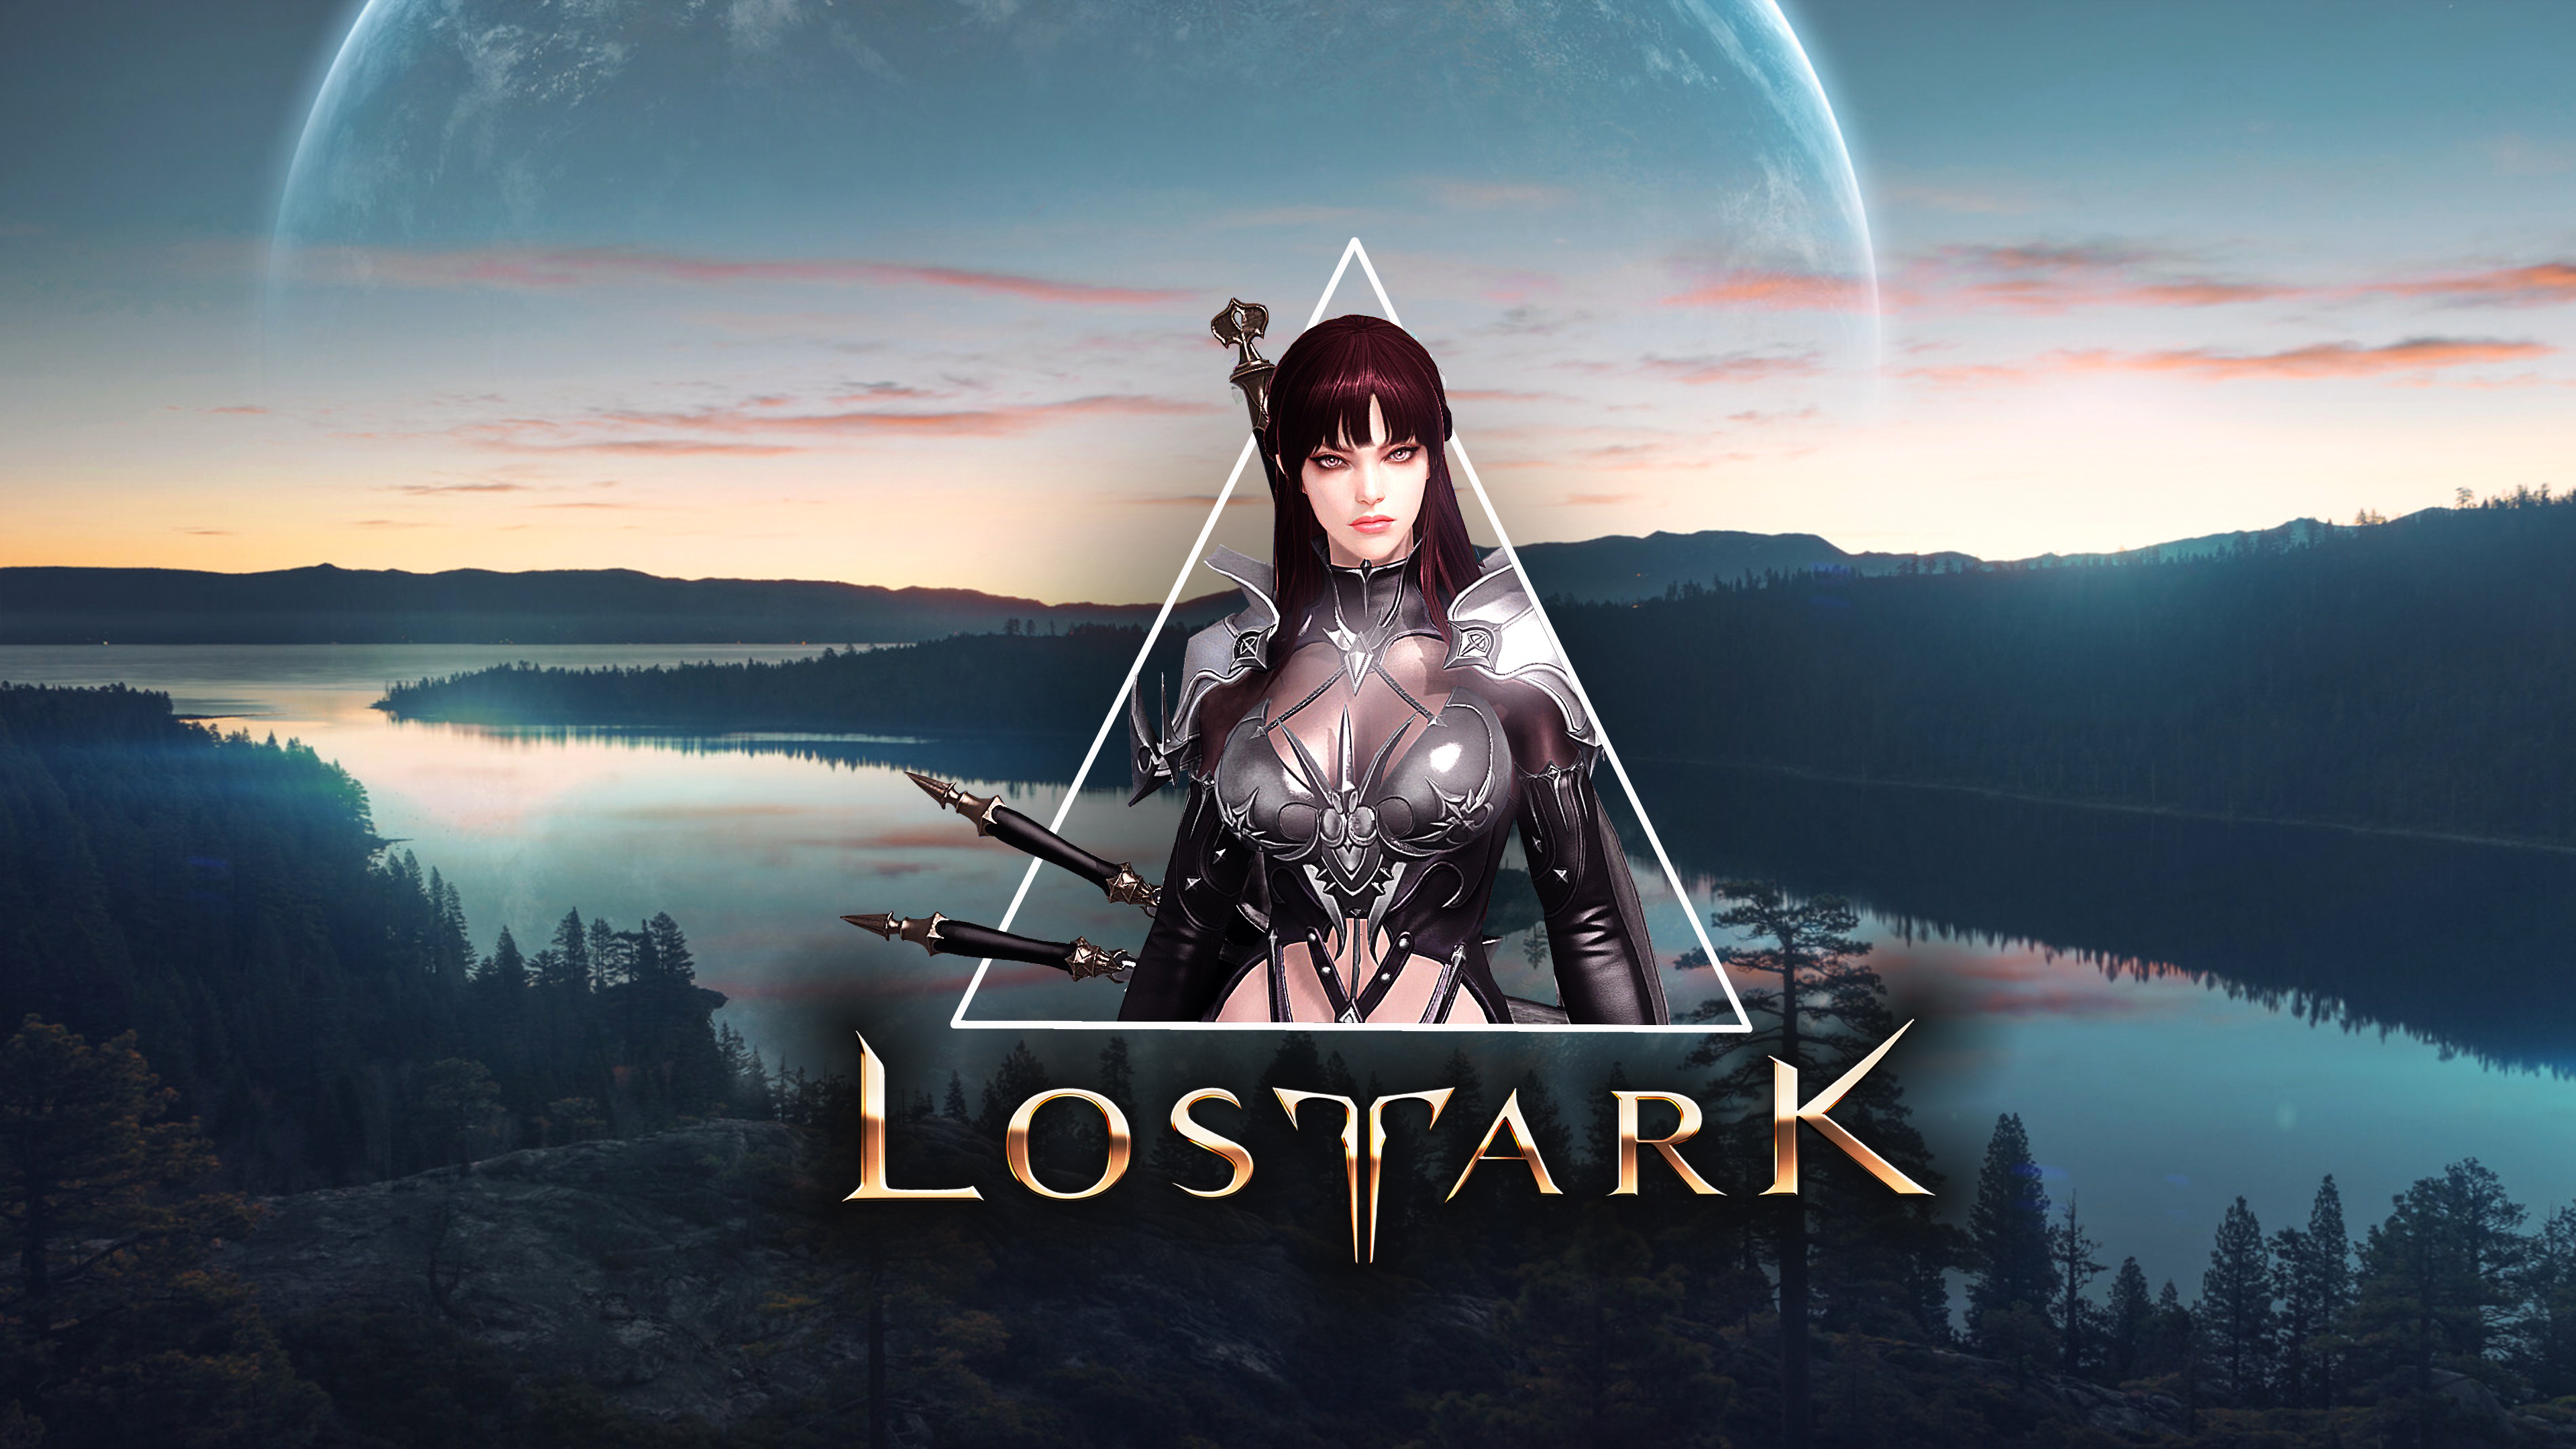 General 3840x2160 Lostark Fantasy view picture-in-picture video game characters video game girls fantasy girl landscape PC gaming